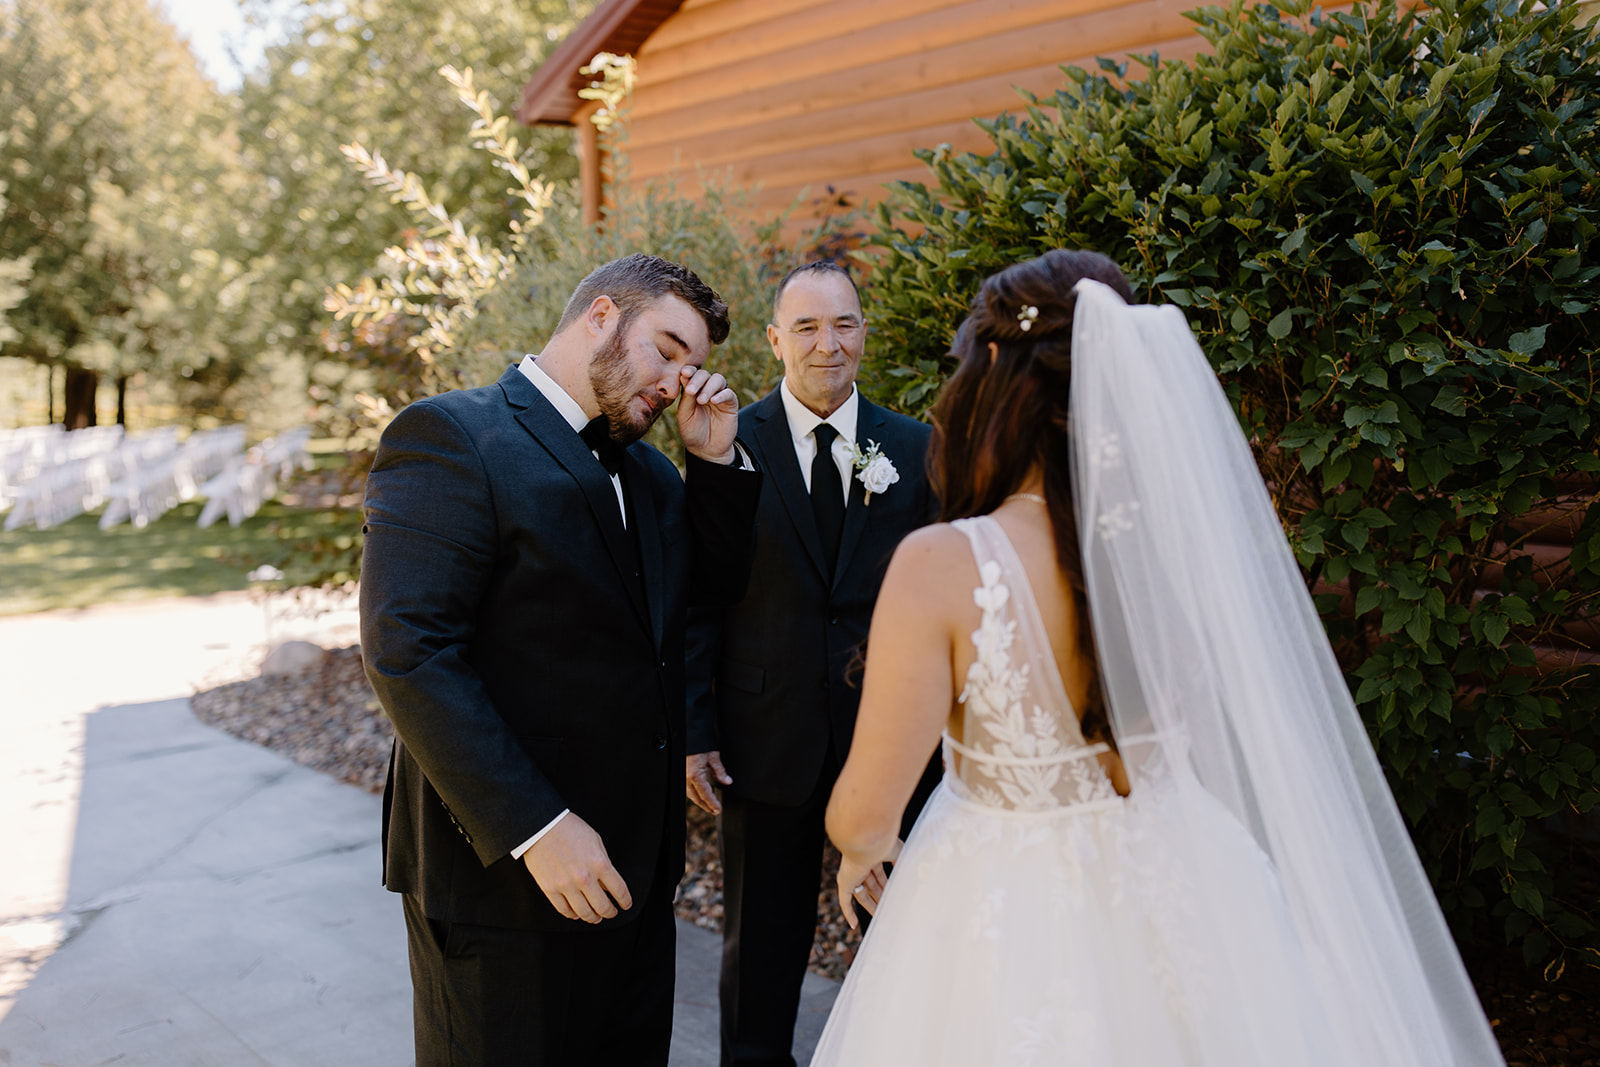 Two men cry as they look at the bride